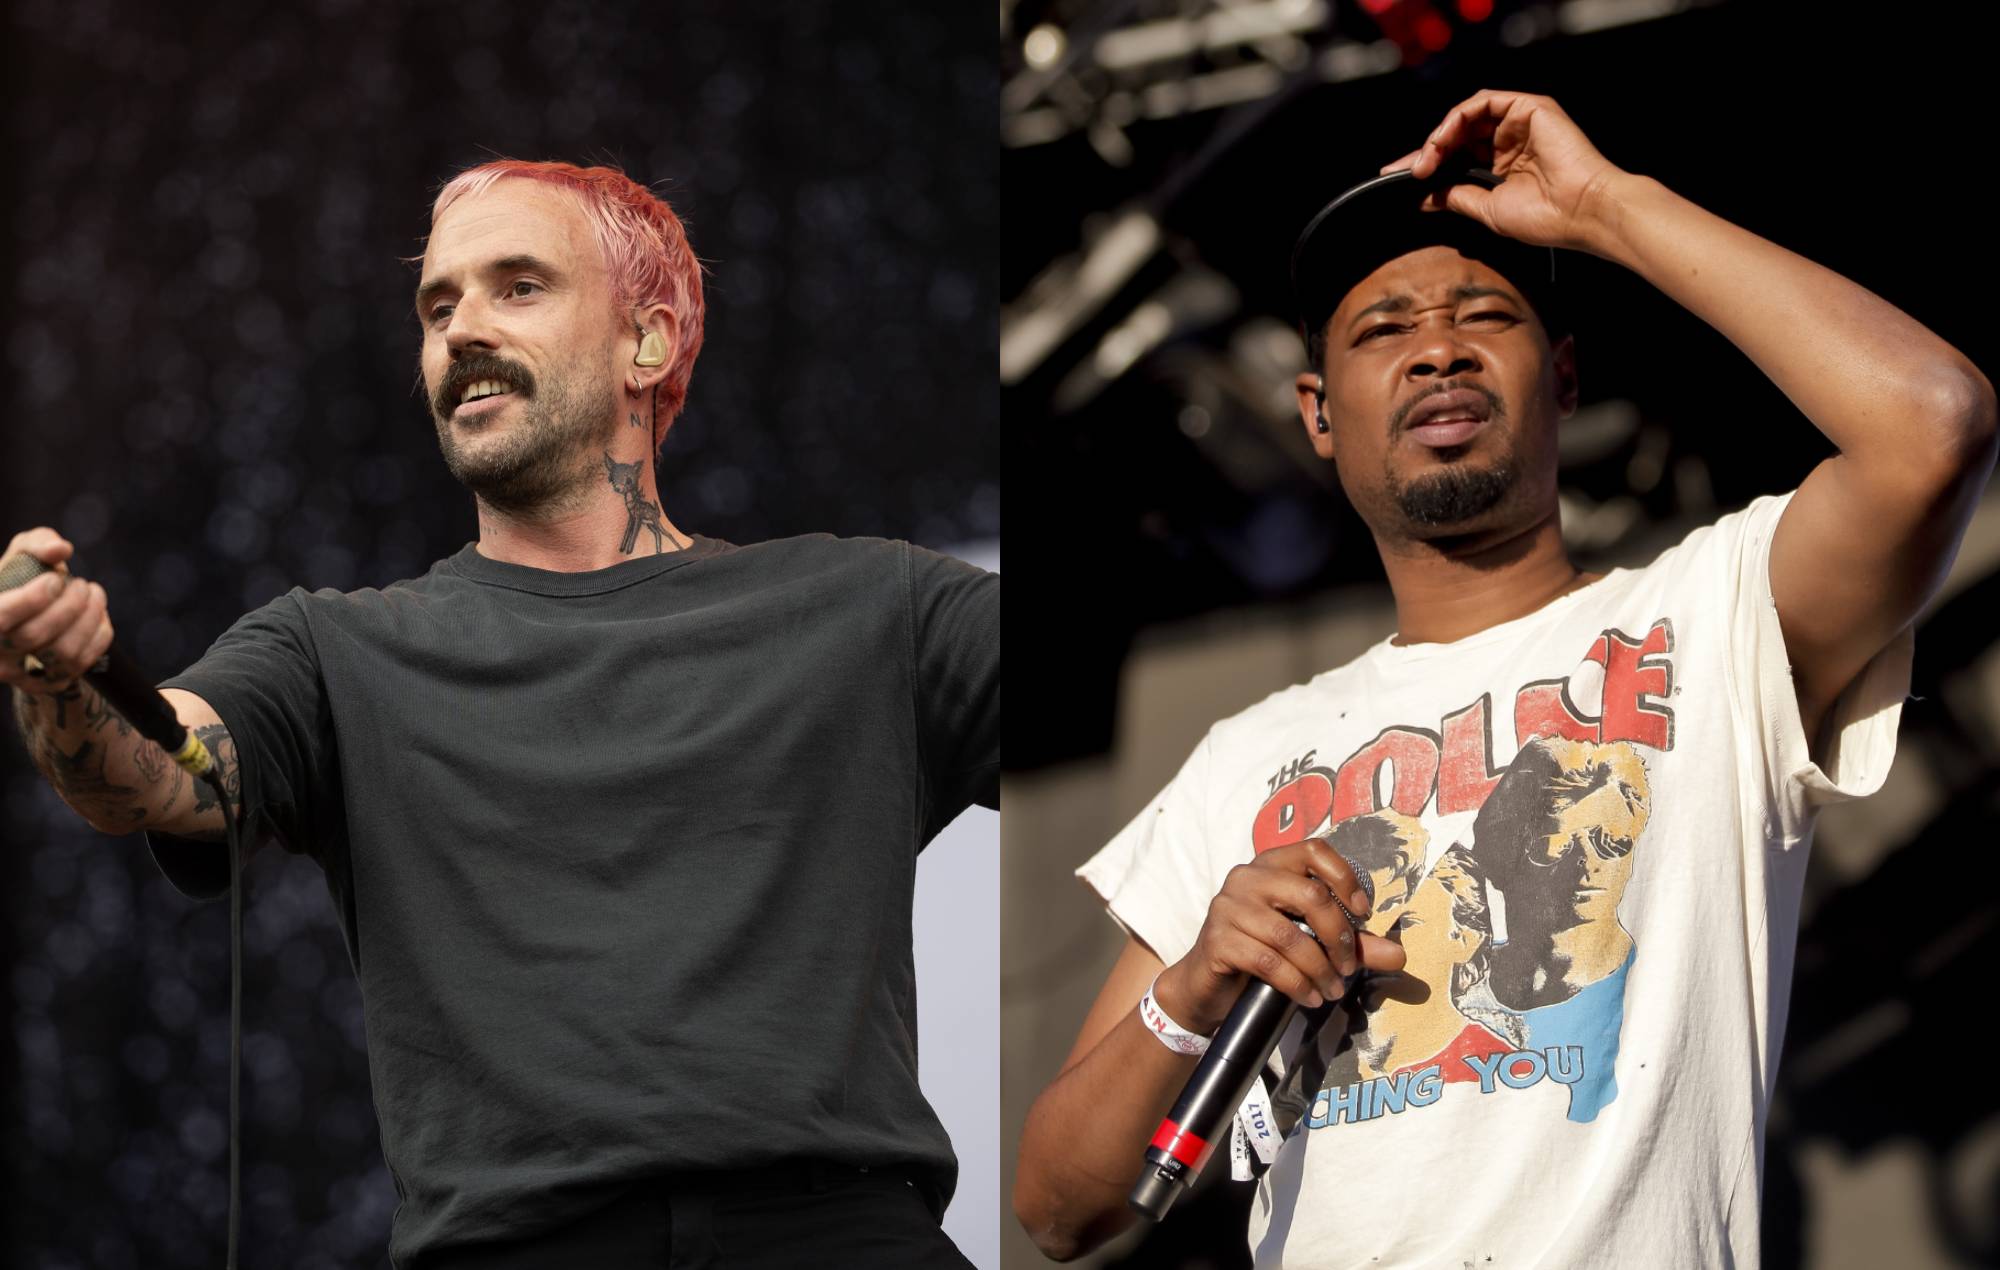 IDLES bring out Danny Brown as a special guest during Glastonbury 2024 set